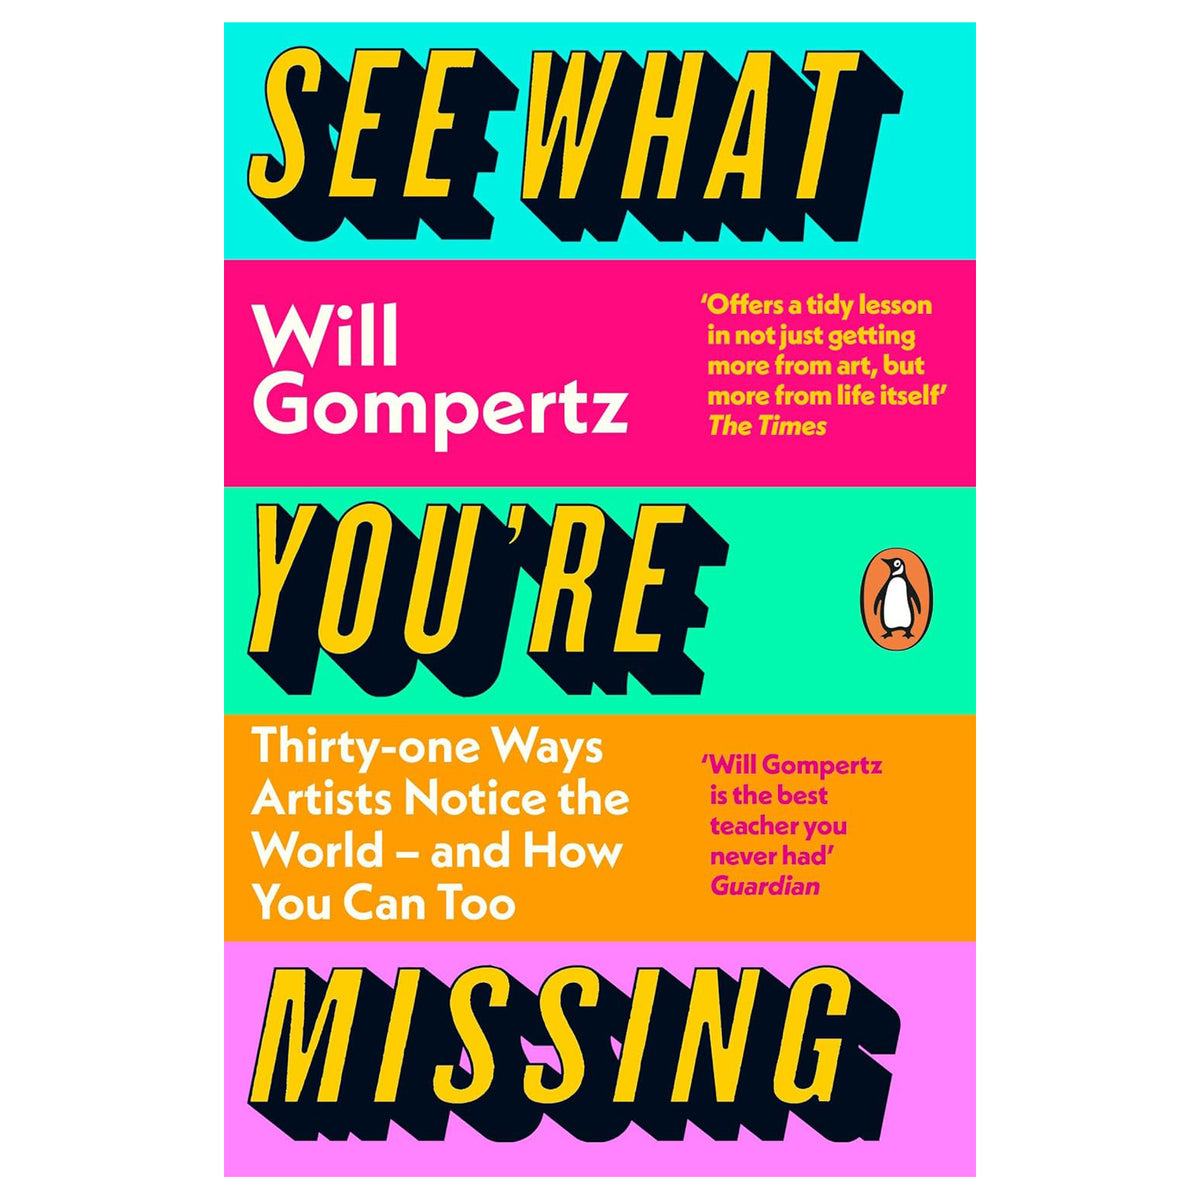 Will Gompertz See What You're Missing